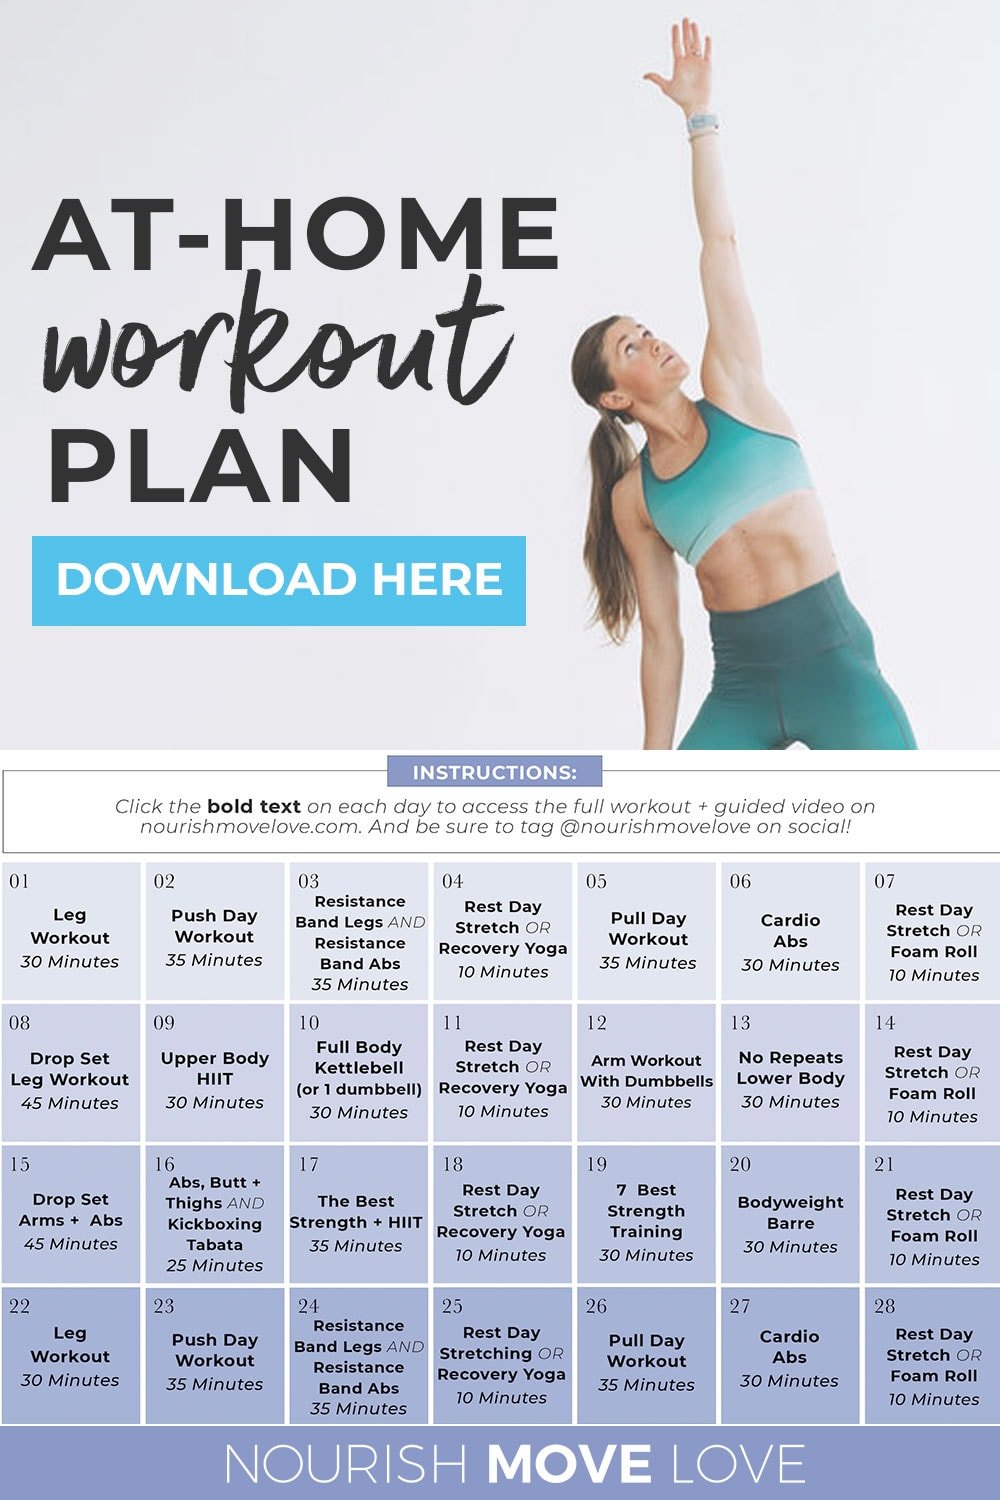 15 Minute 8 Week Workout Plan For Females for Burn Fat fast | Fitness